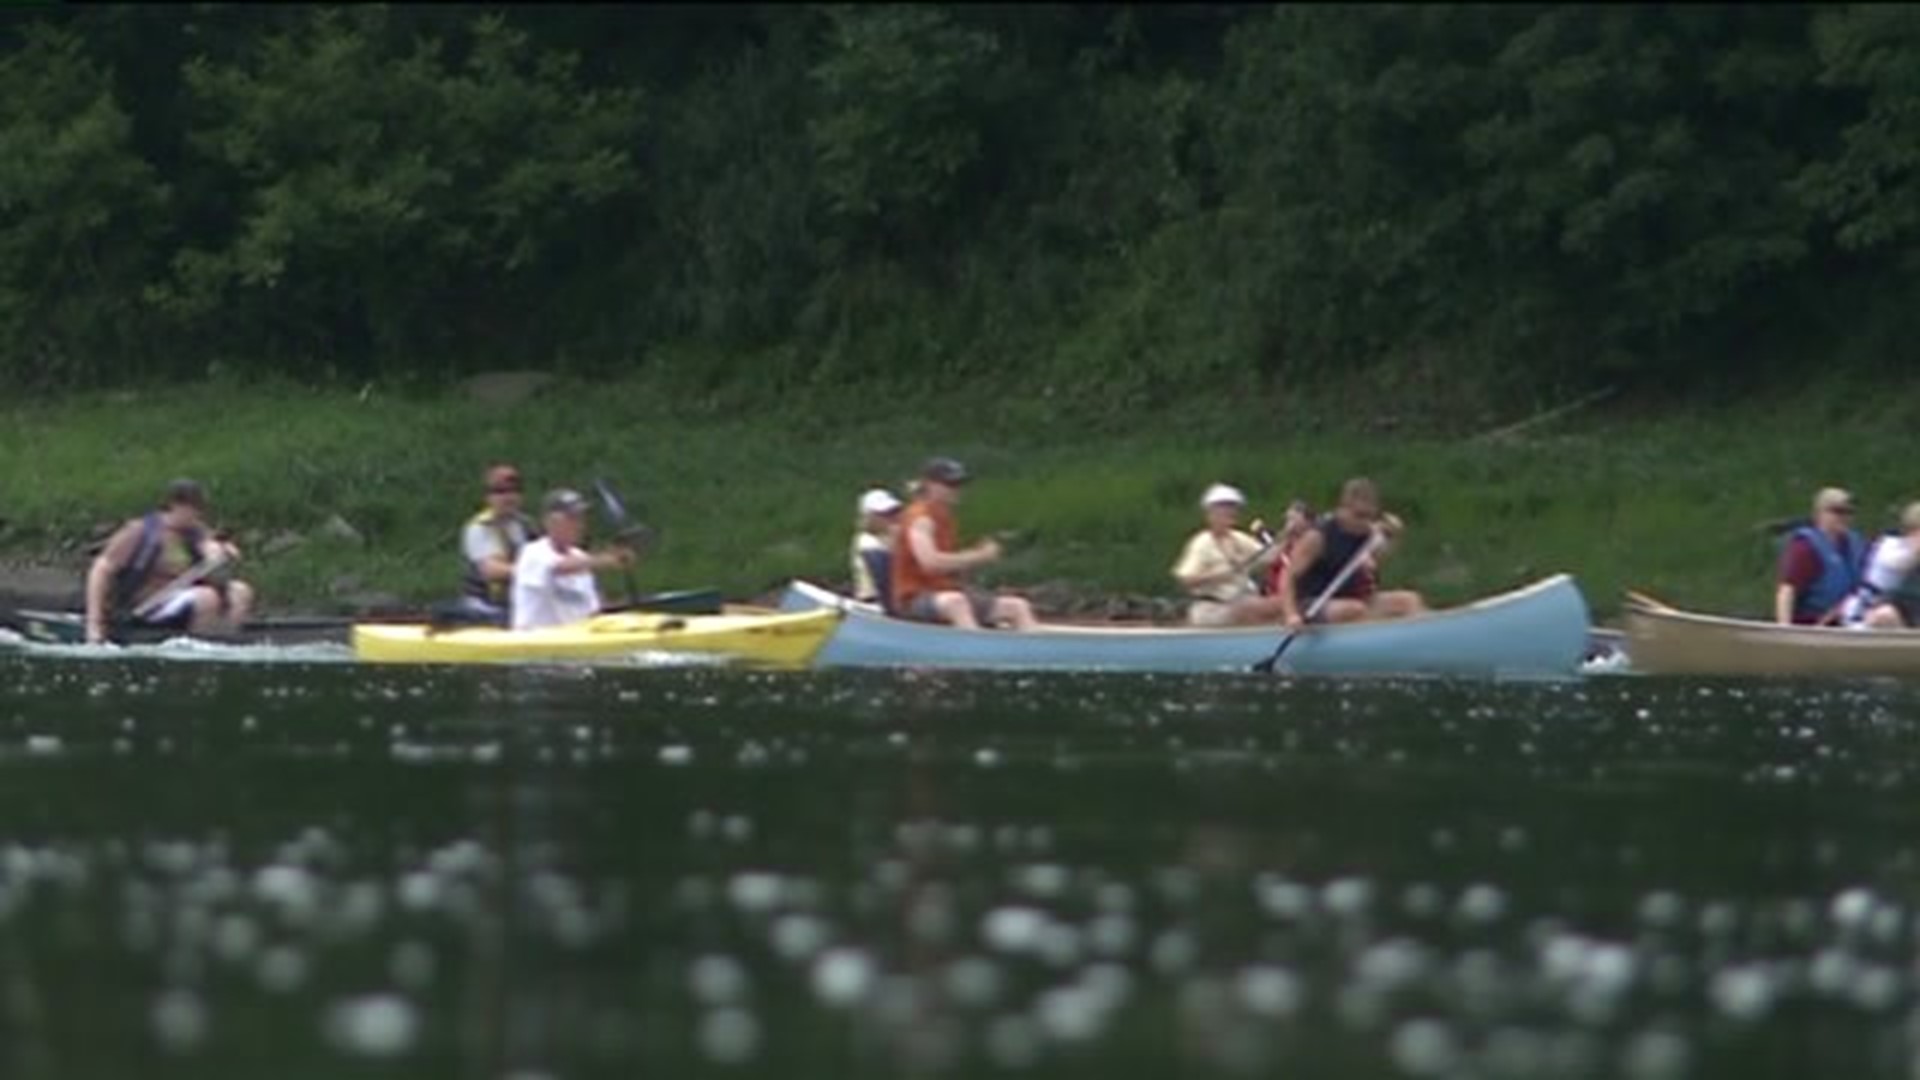 The Push To Paddle: Kayaking Brings Adventure to Summer